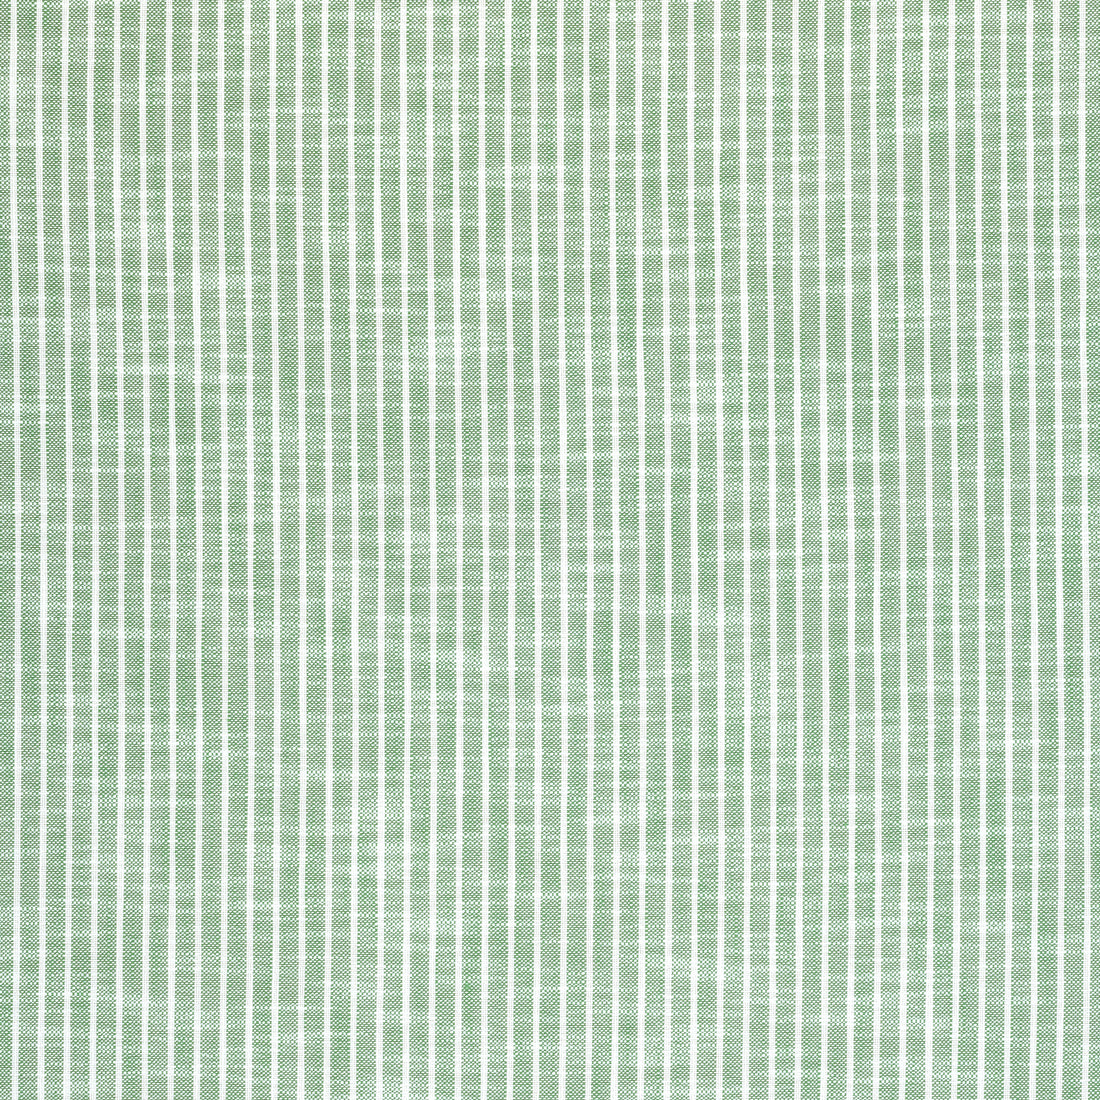 Bayside Stripe fabric in kelly green color - pattern number W73474 - by Thibaut in the Landmark collection